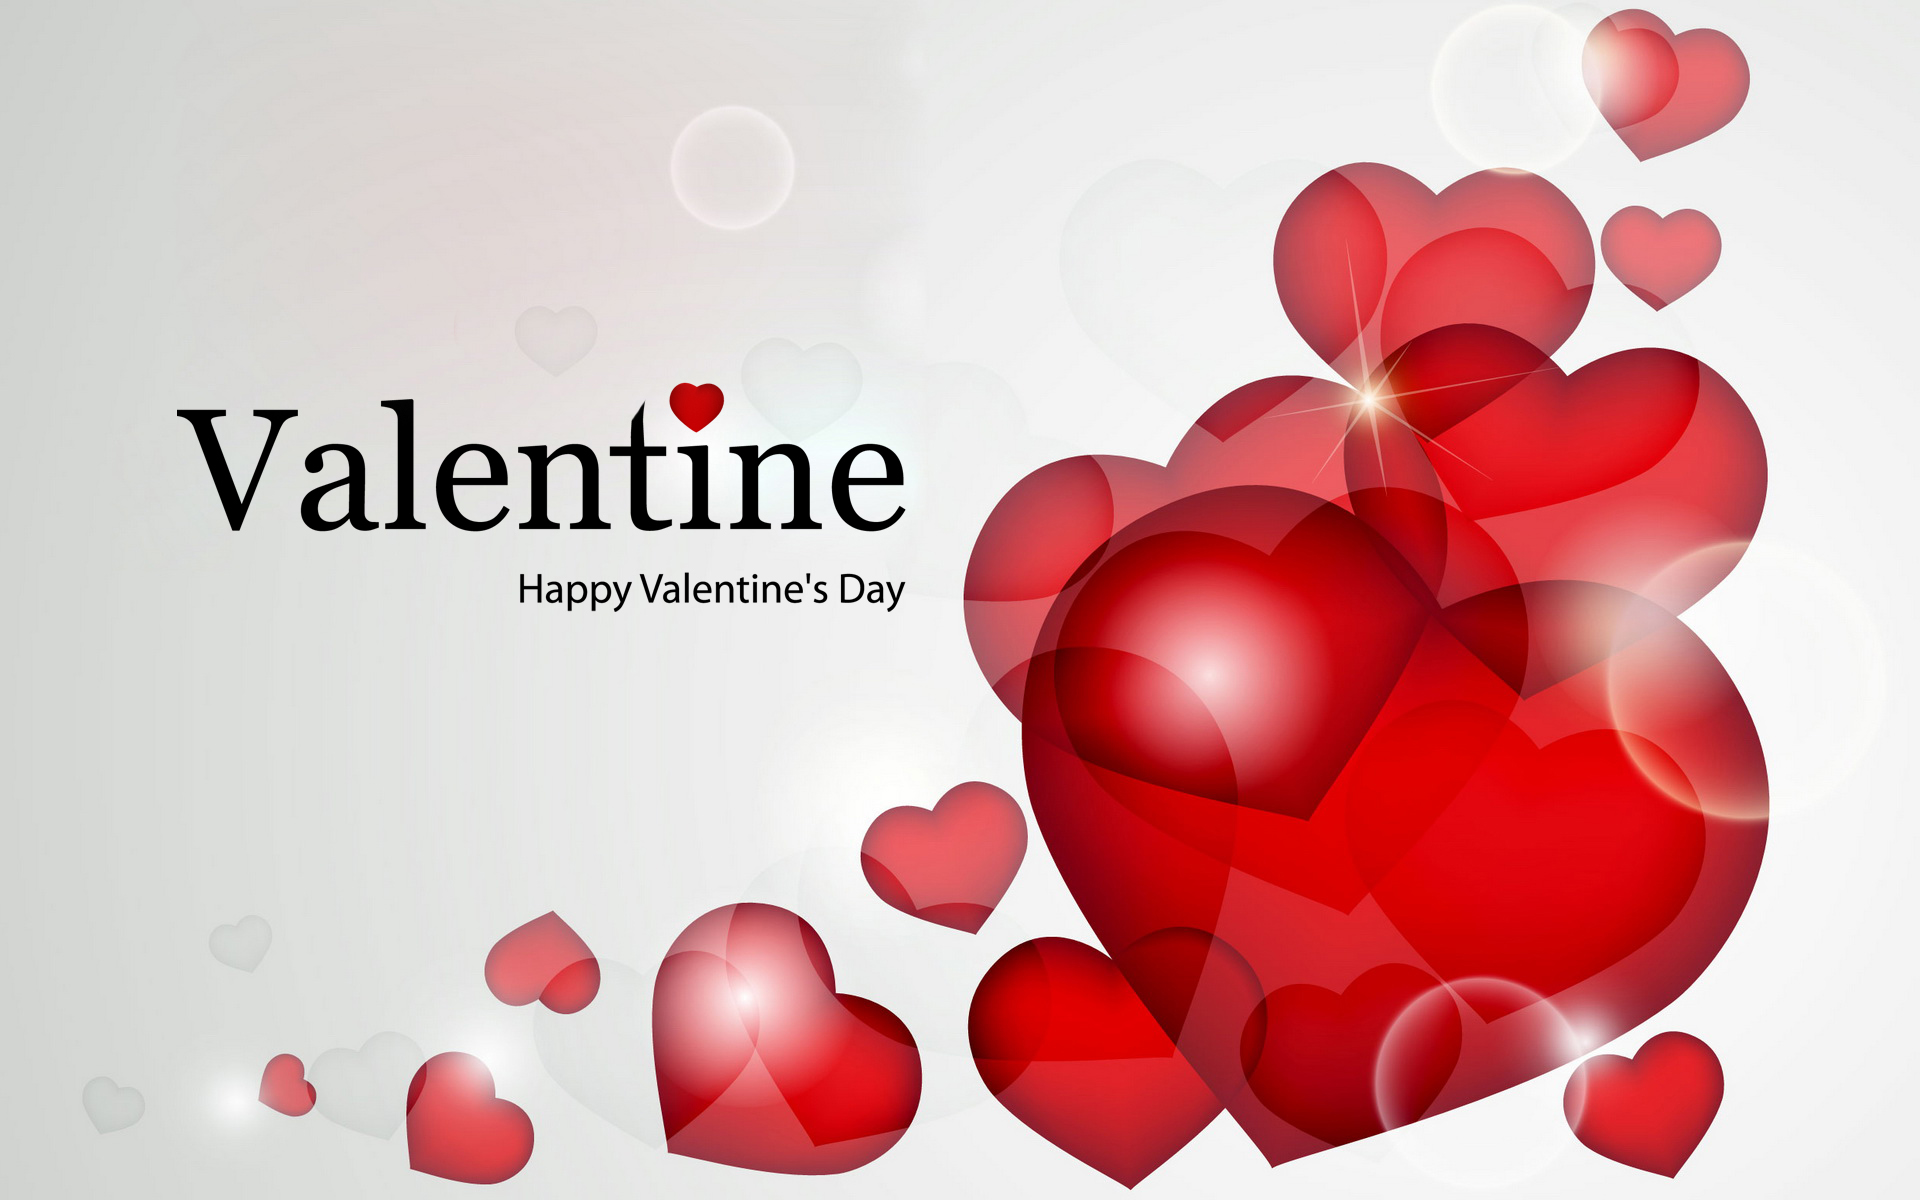 Happy Valentines Day Wallpaper Image Cards